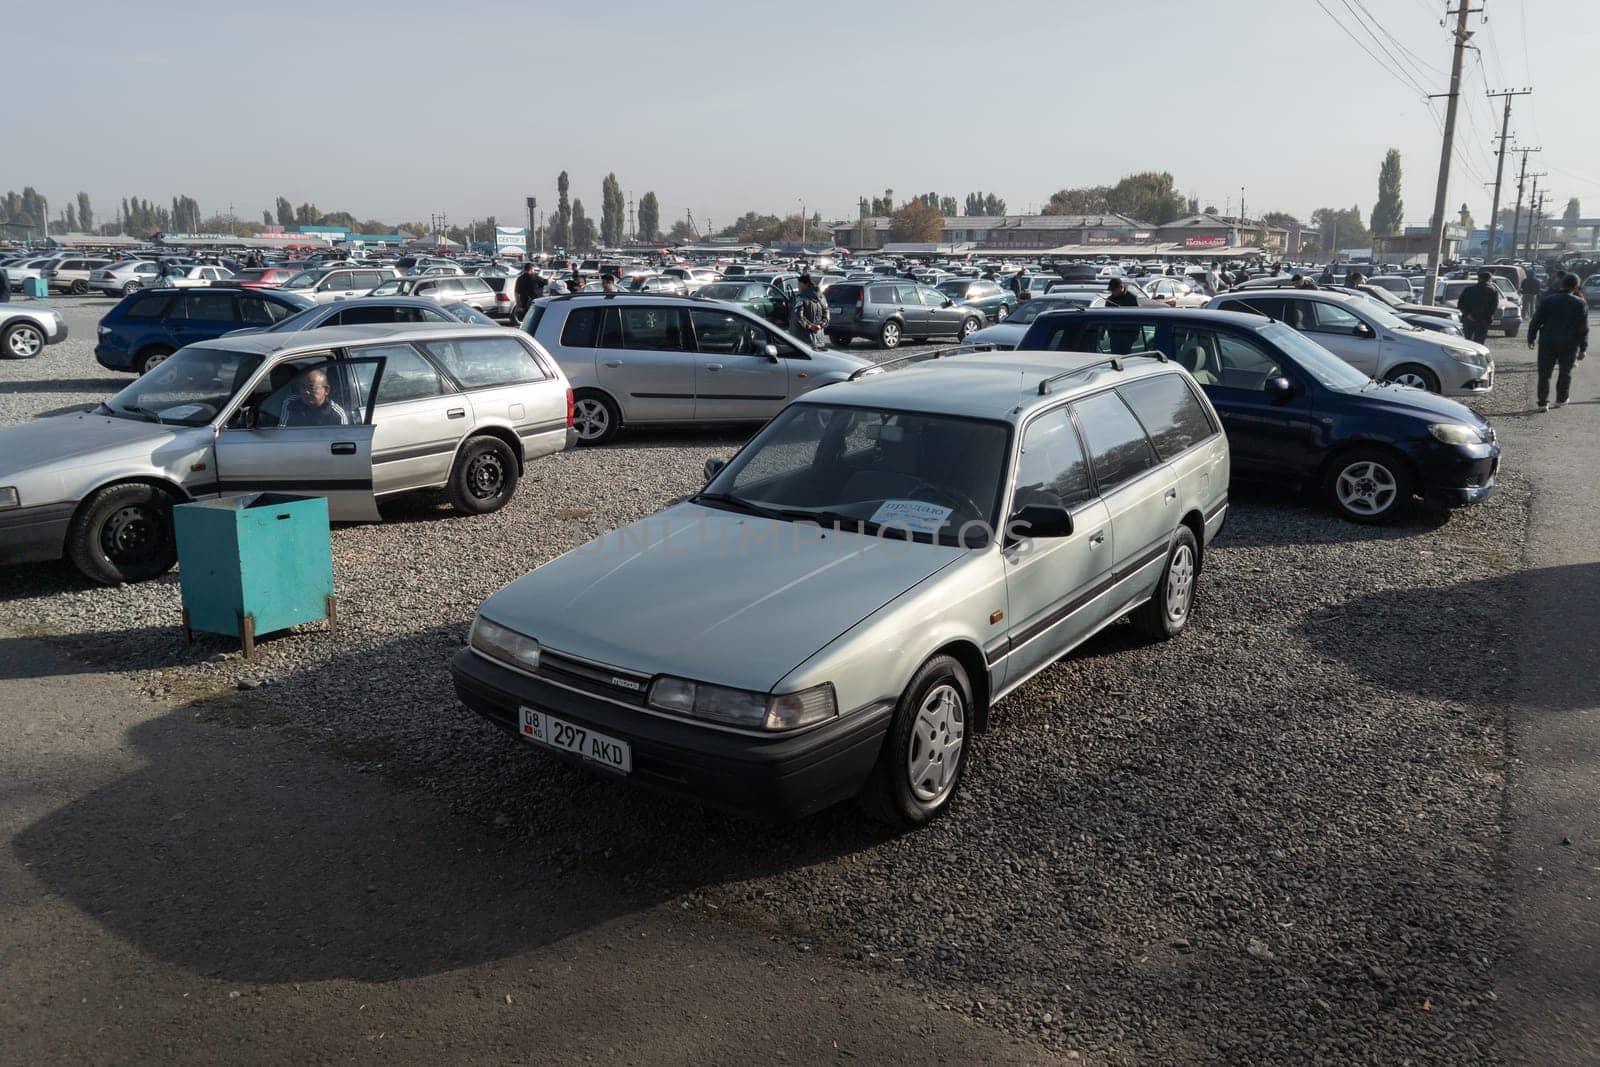 Large used car open air market RIOM Auto in Bishkek, Kyrgyzstan by z1b